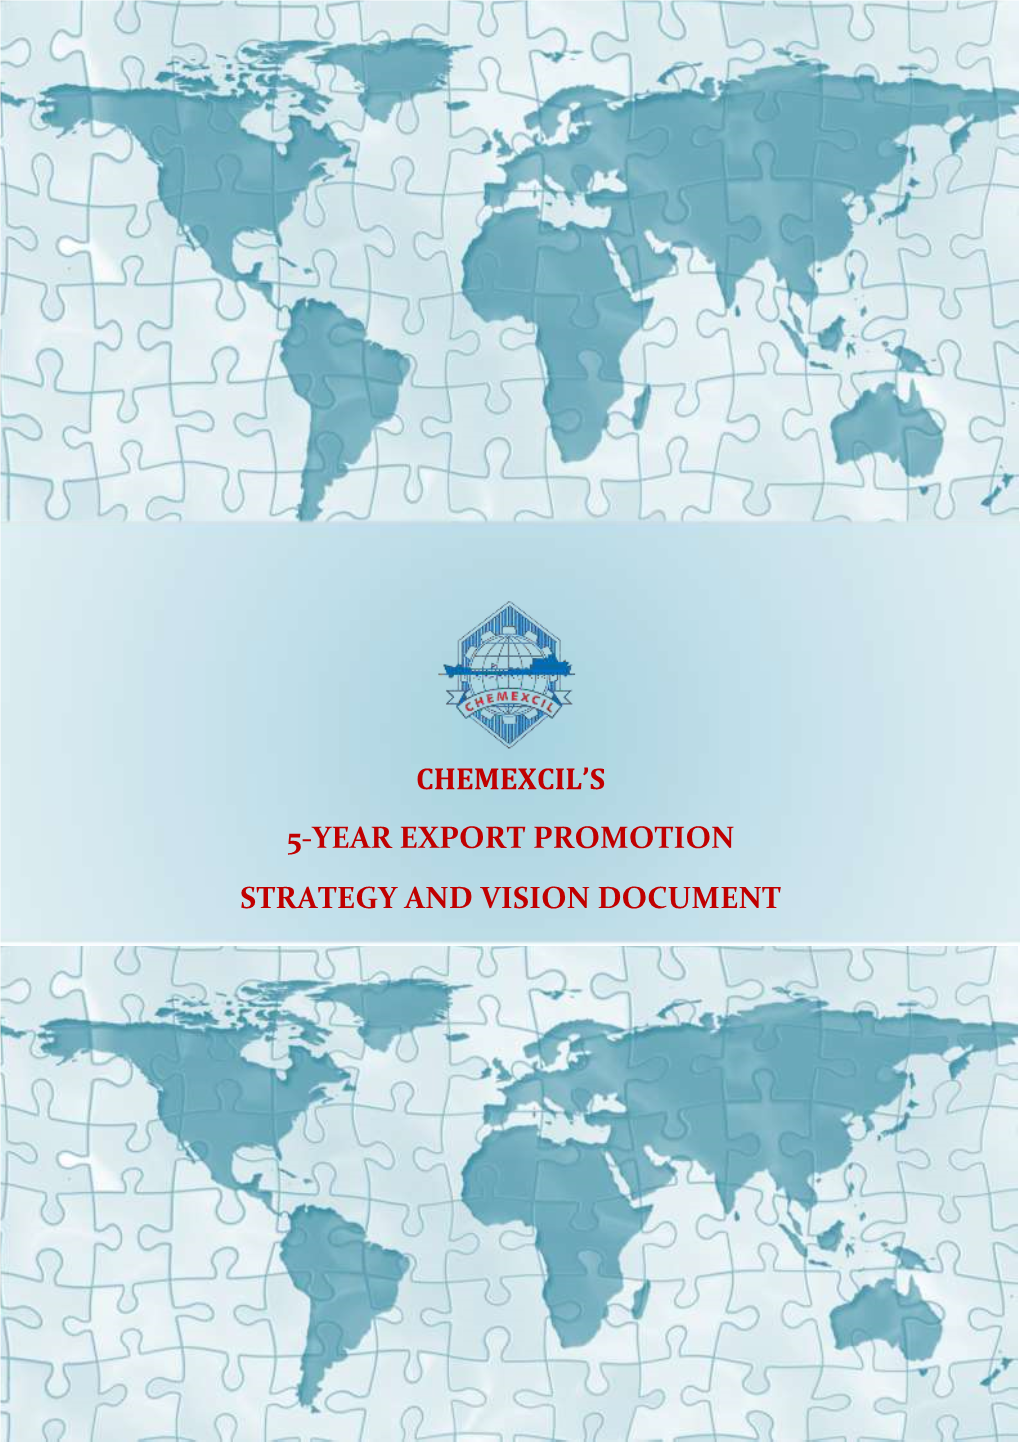 Chemexcil's 5-Year Export Promotion Strategy And